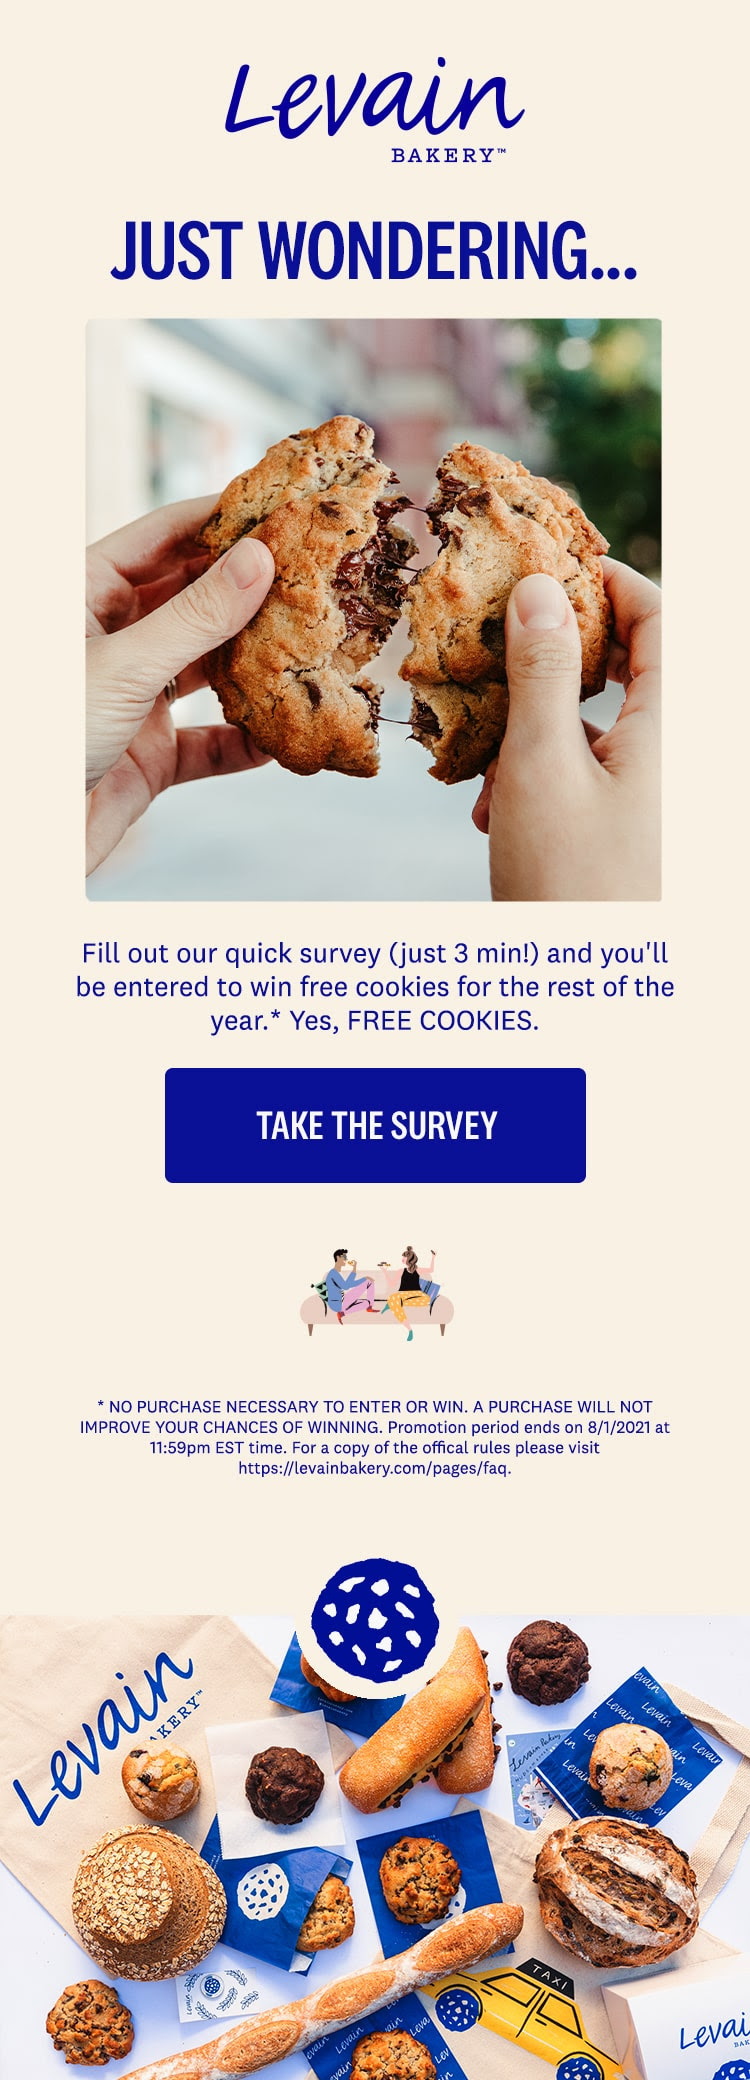 Fill out our quick survey and you'll be entered to win free cookies for the rest of the year.